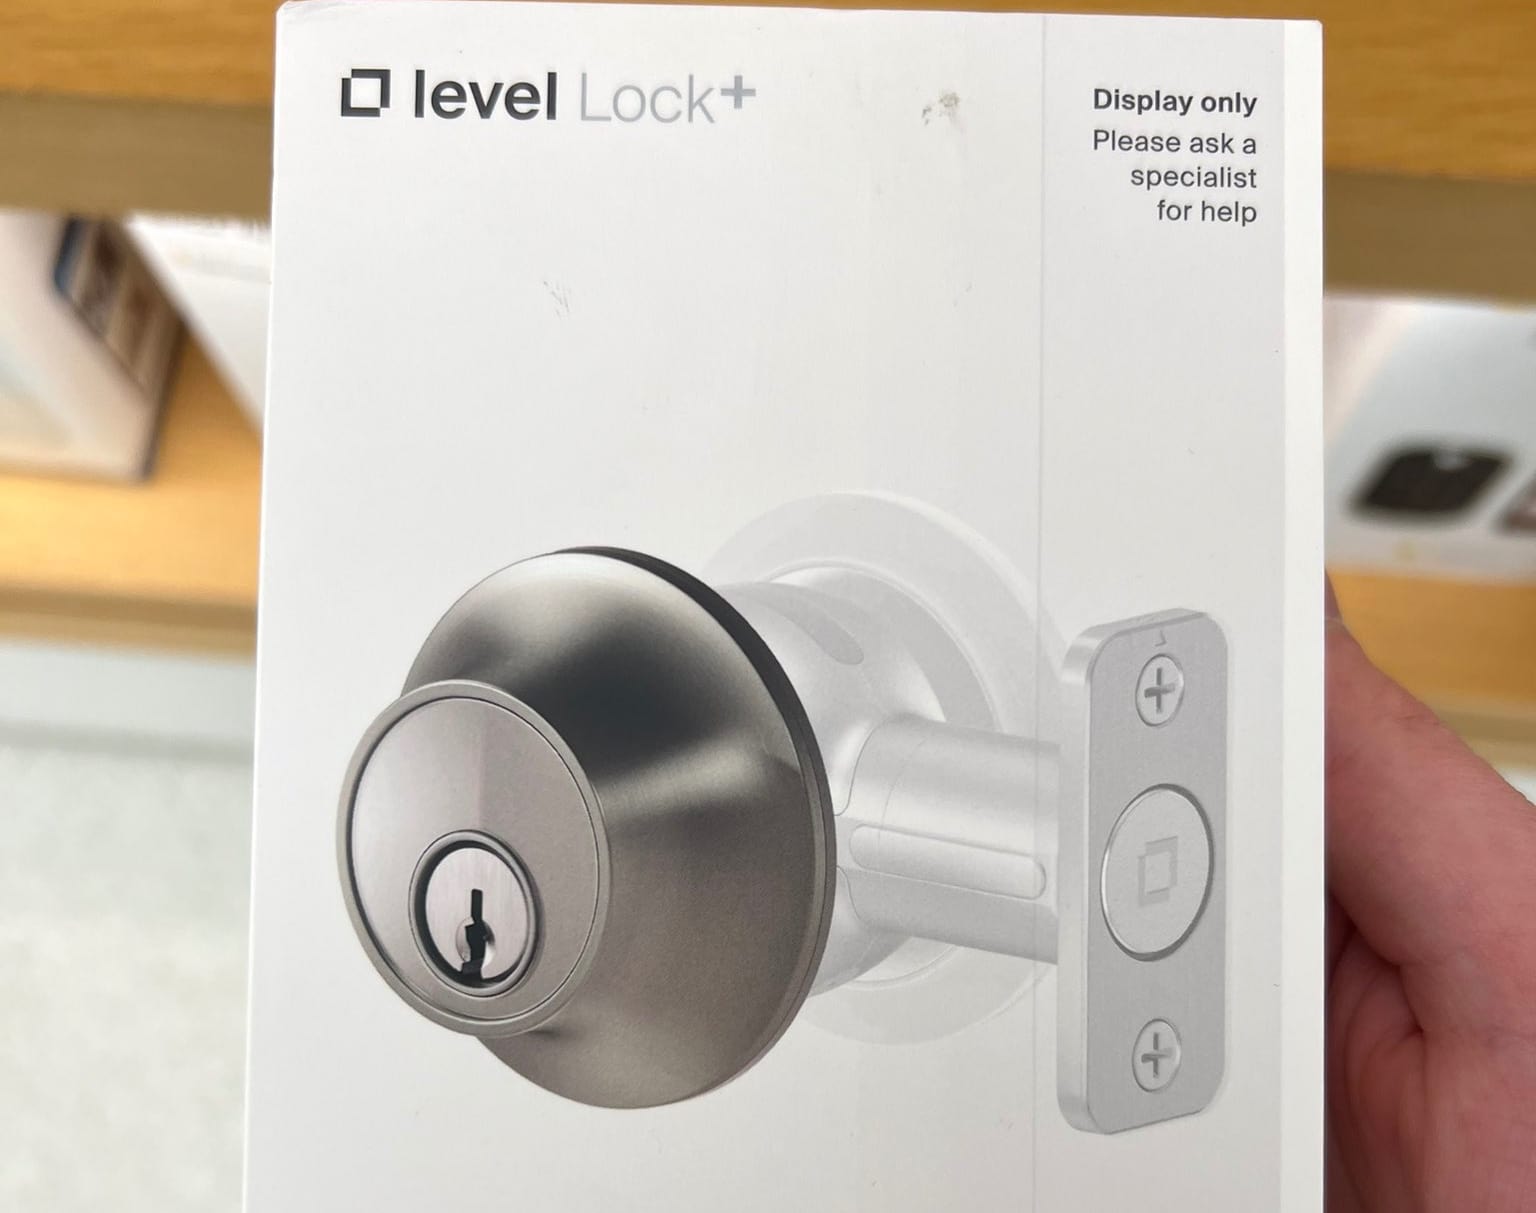 The Level Lock+ is available at some Apple Store locations.